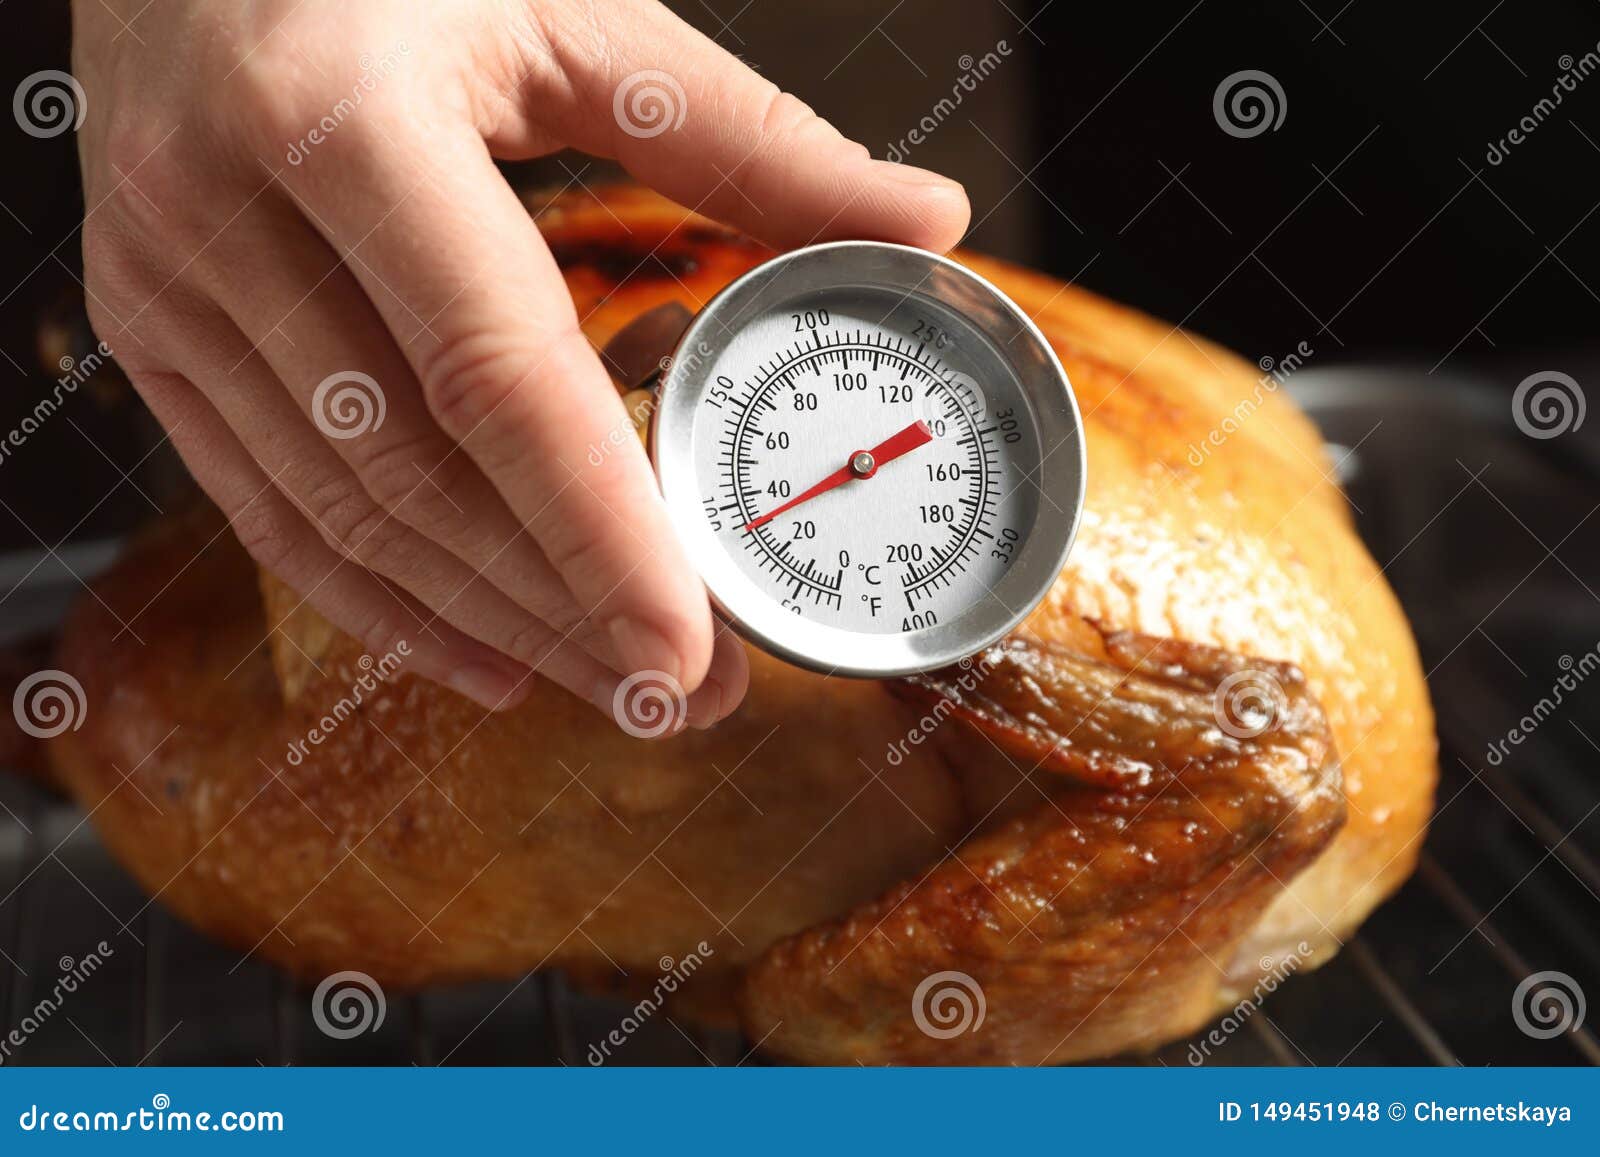 https://thumbs.dreamstime.com/z/woman-measuring-temperature-whole-roasted-turkey-meat-thermometer-closeup-149451948.jpg